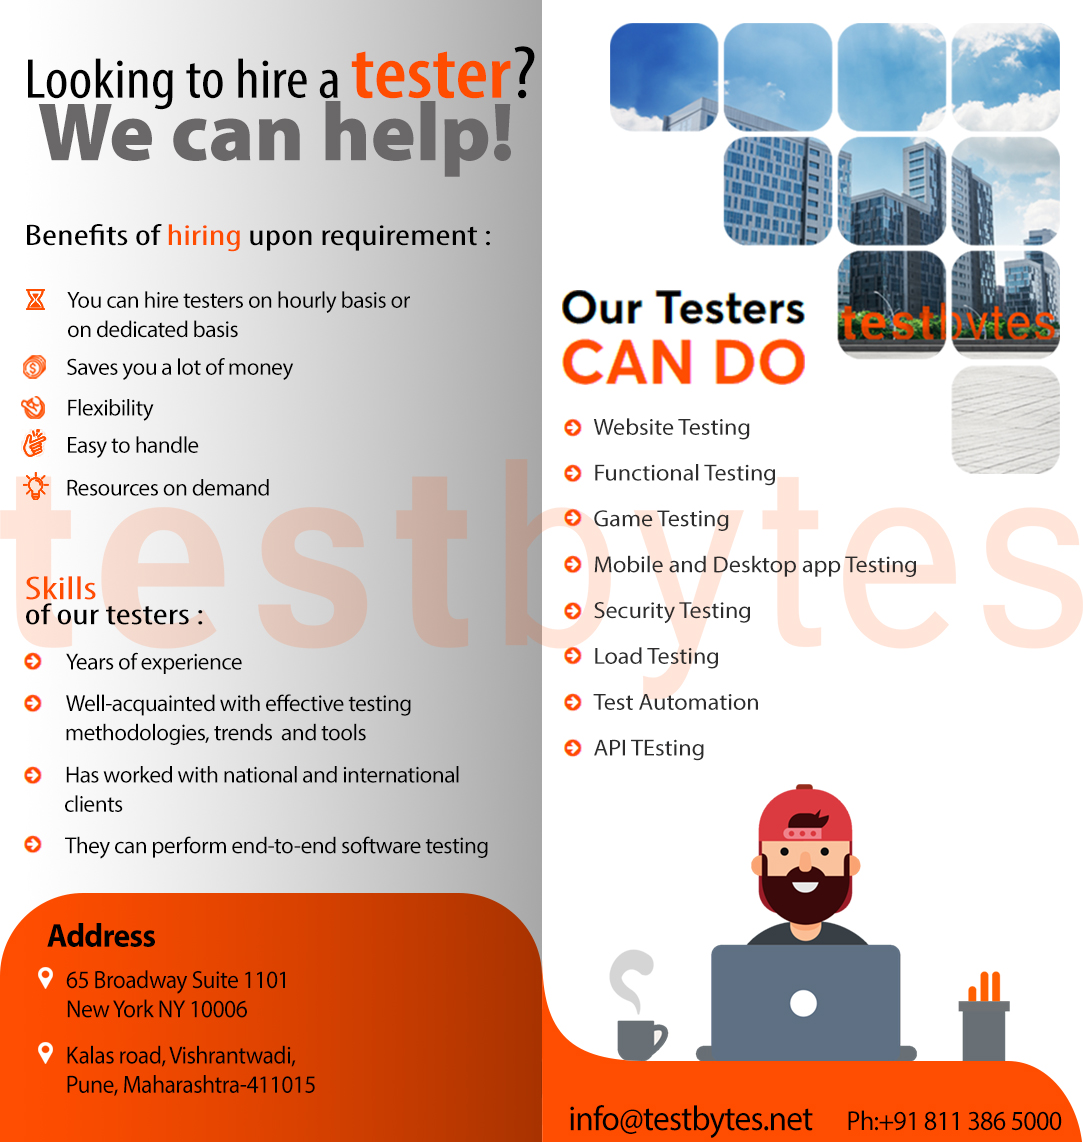 Looking For Hire a Tester